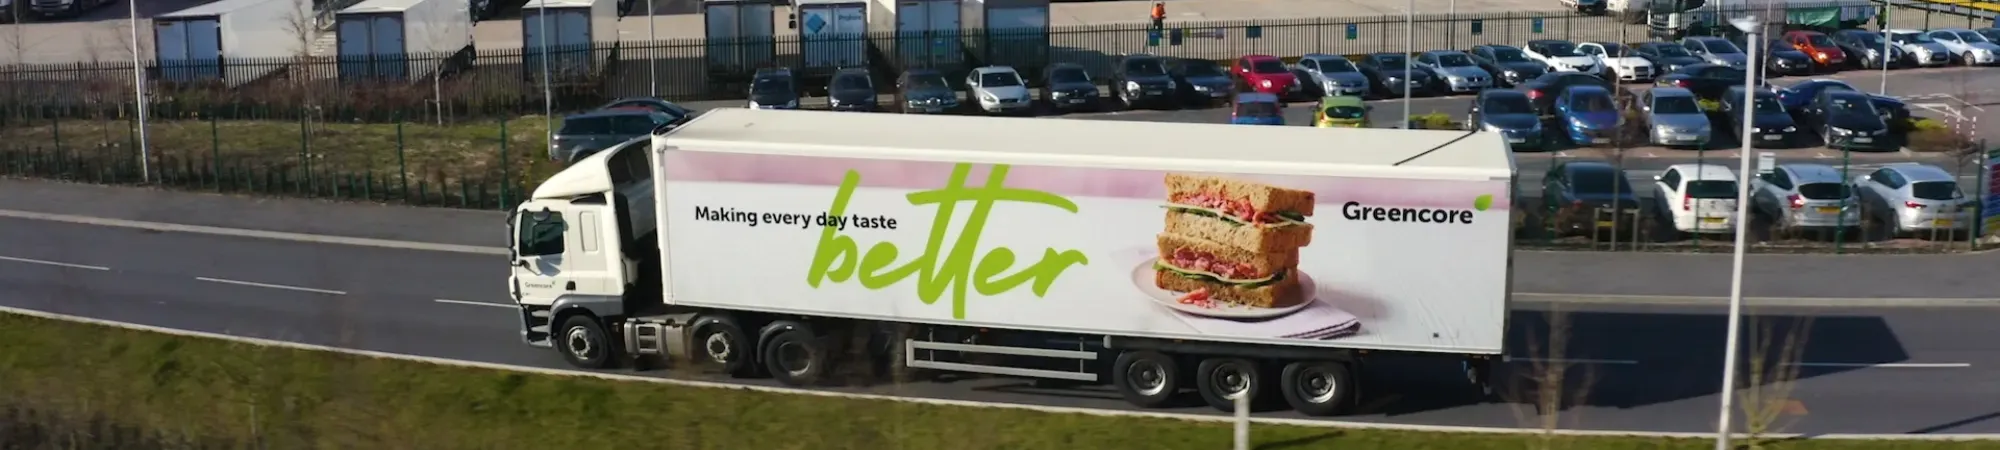 Greencore Lorry Banner